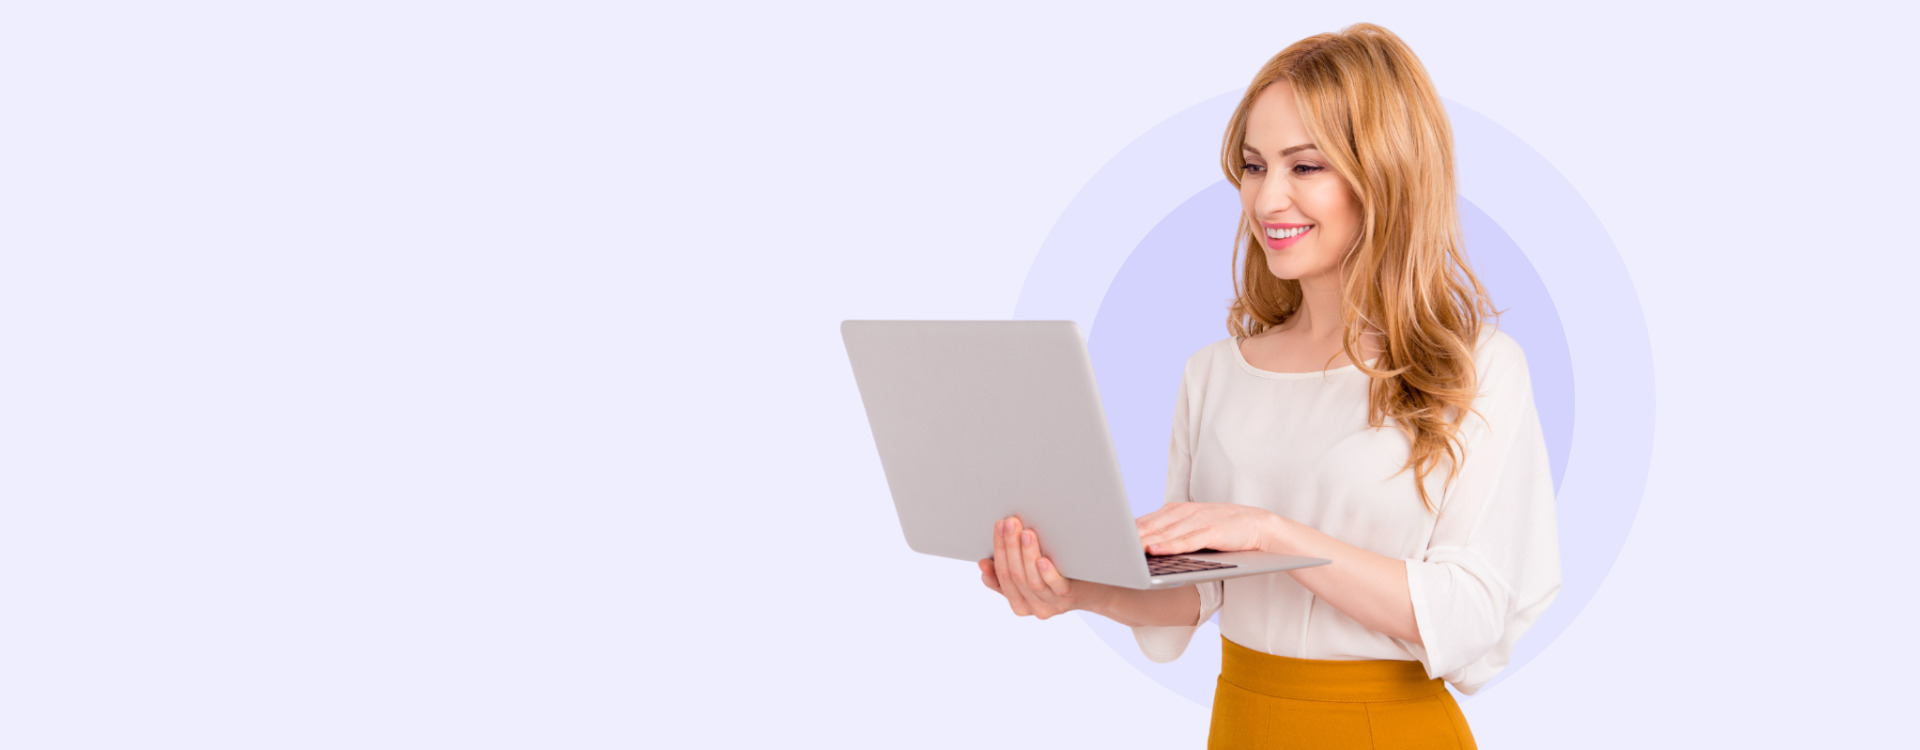 Homepage banner image of women smiling, while holding and looking at a laptop.